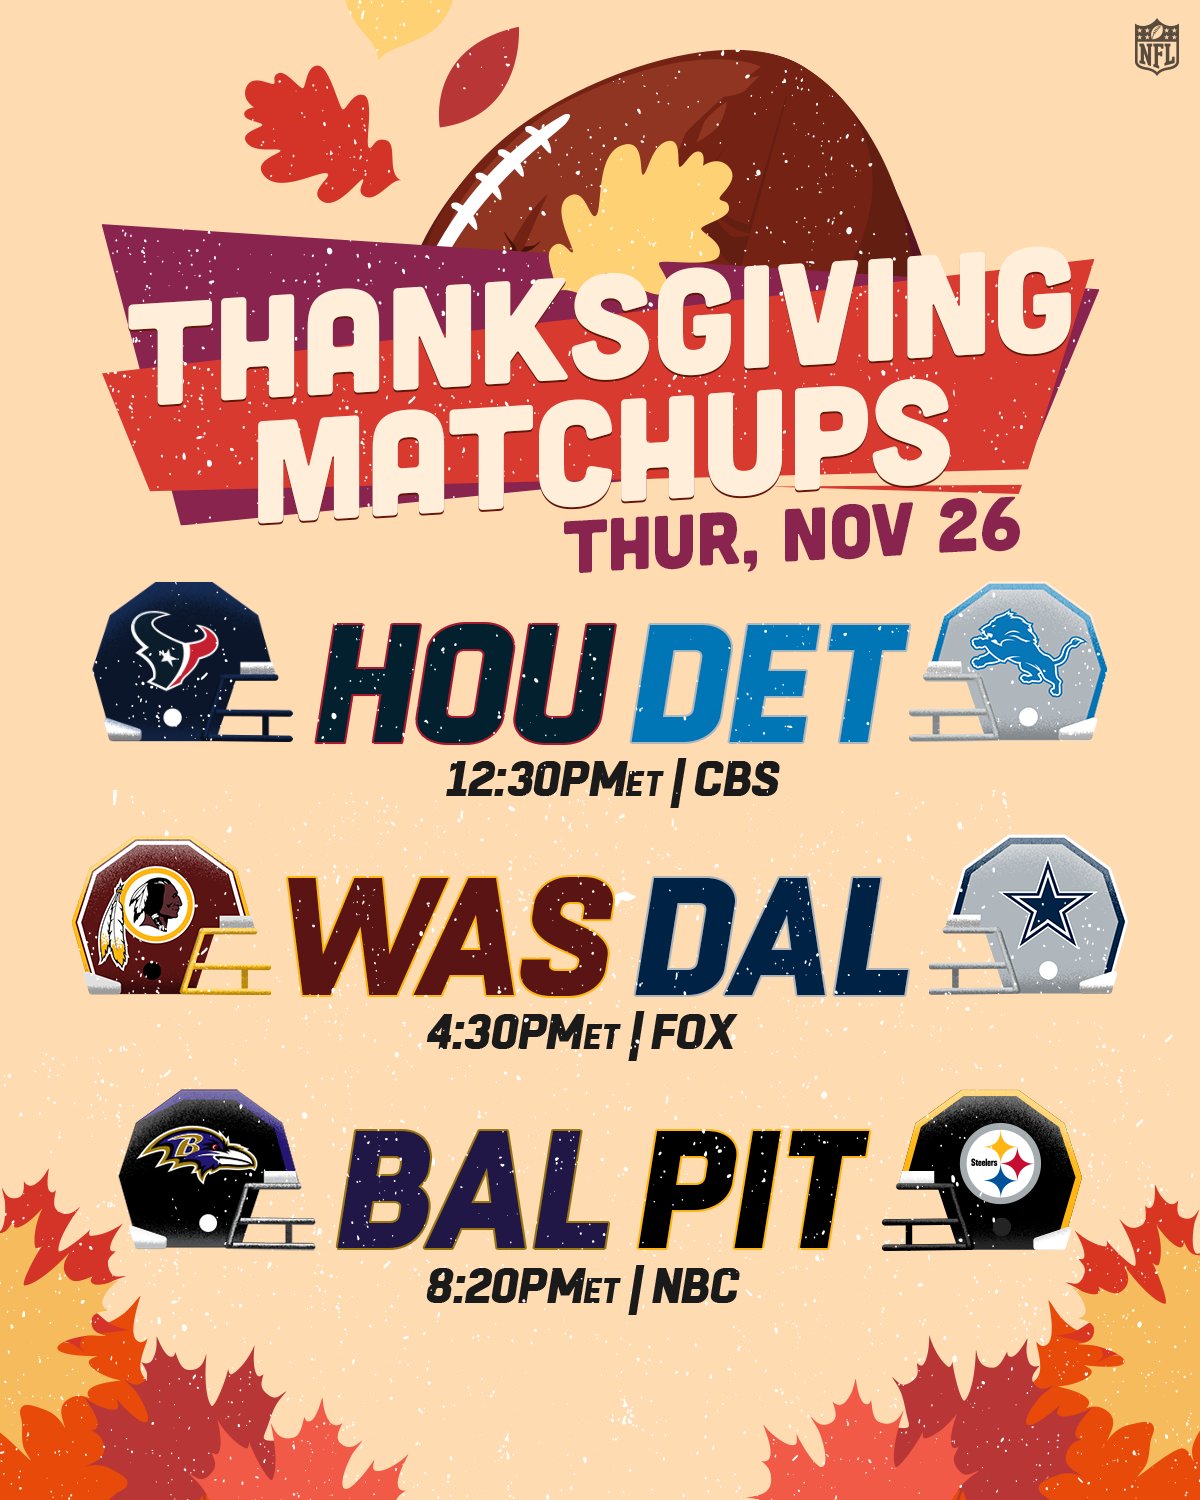 watch nfl games on thanksgiving